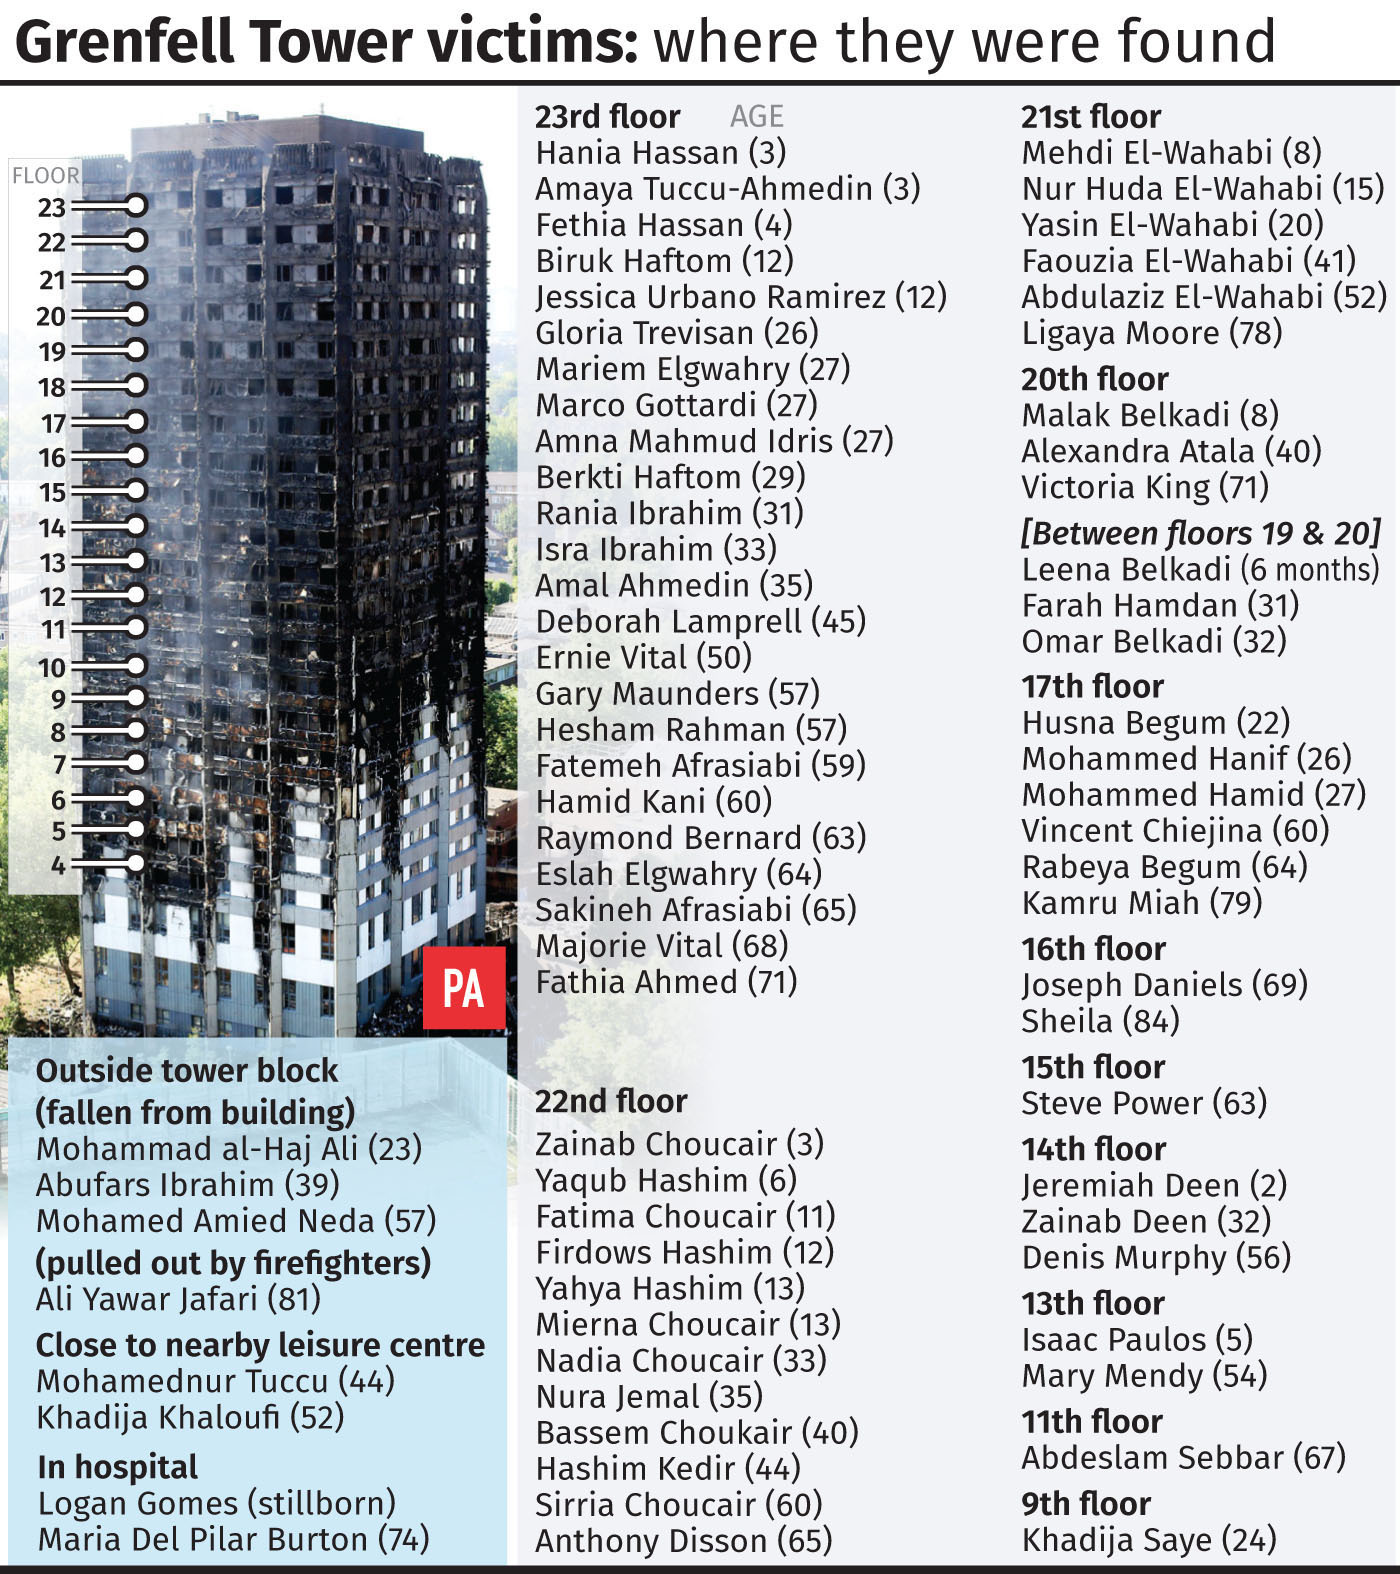 Grenfell Tower victims, where they were found